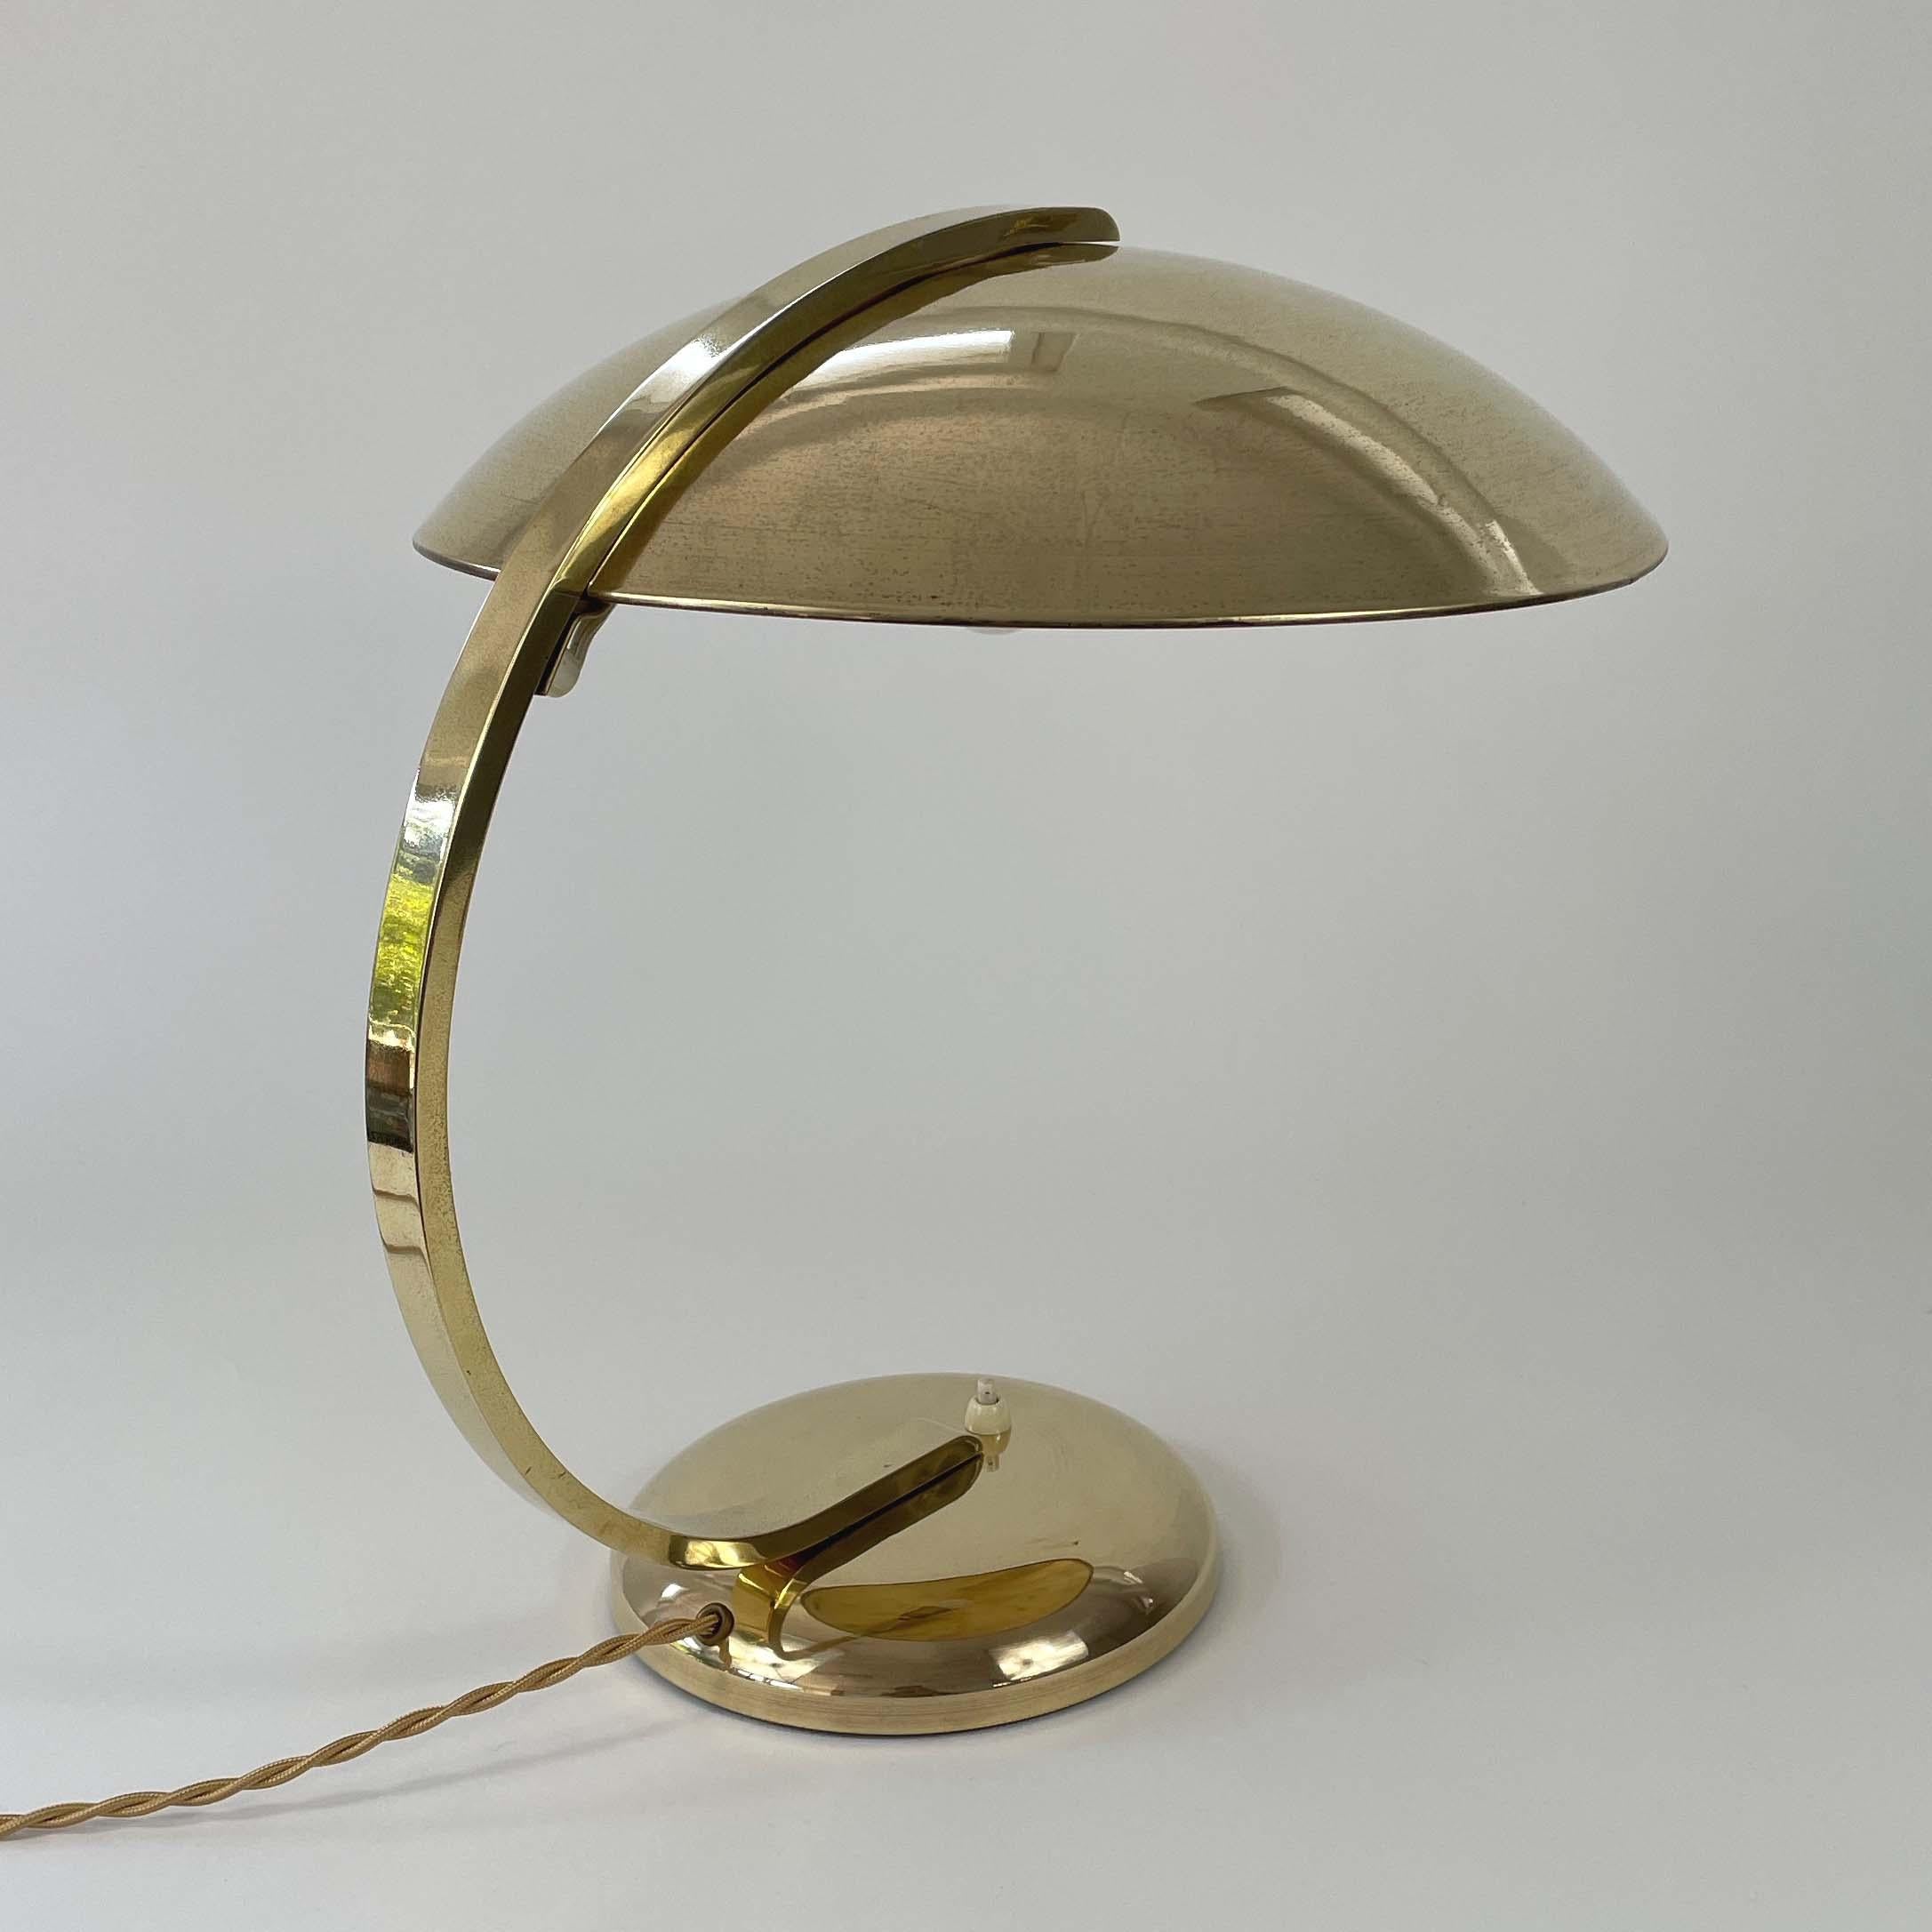 This vintage large original Hillebrand brass desk lamp was designed and manufactured in Germany in the 1930s. Typical streamline design and heavy quality. 

The lamp works with an E27 Edison screw on bulb on 220V as well as 110V. It has been rewired